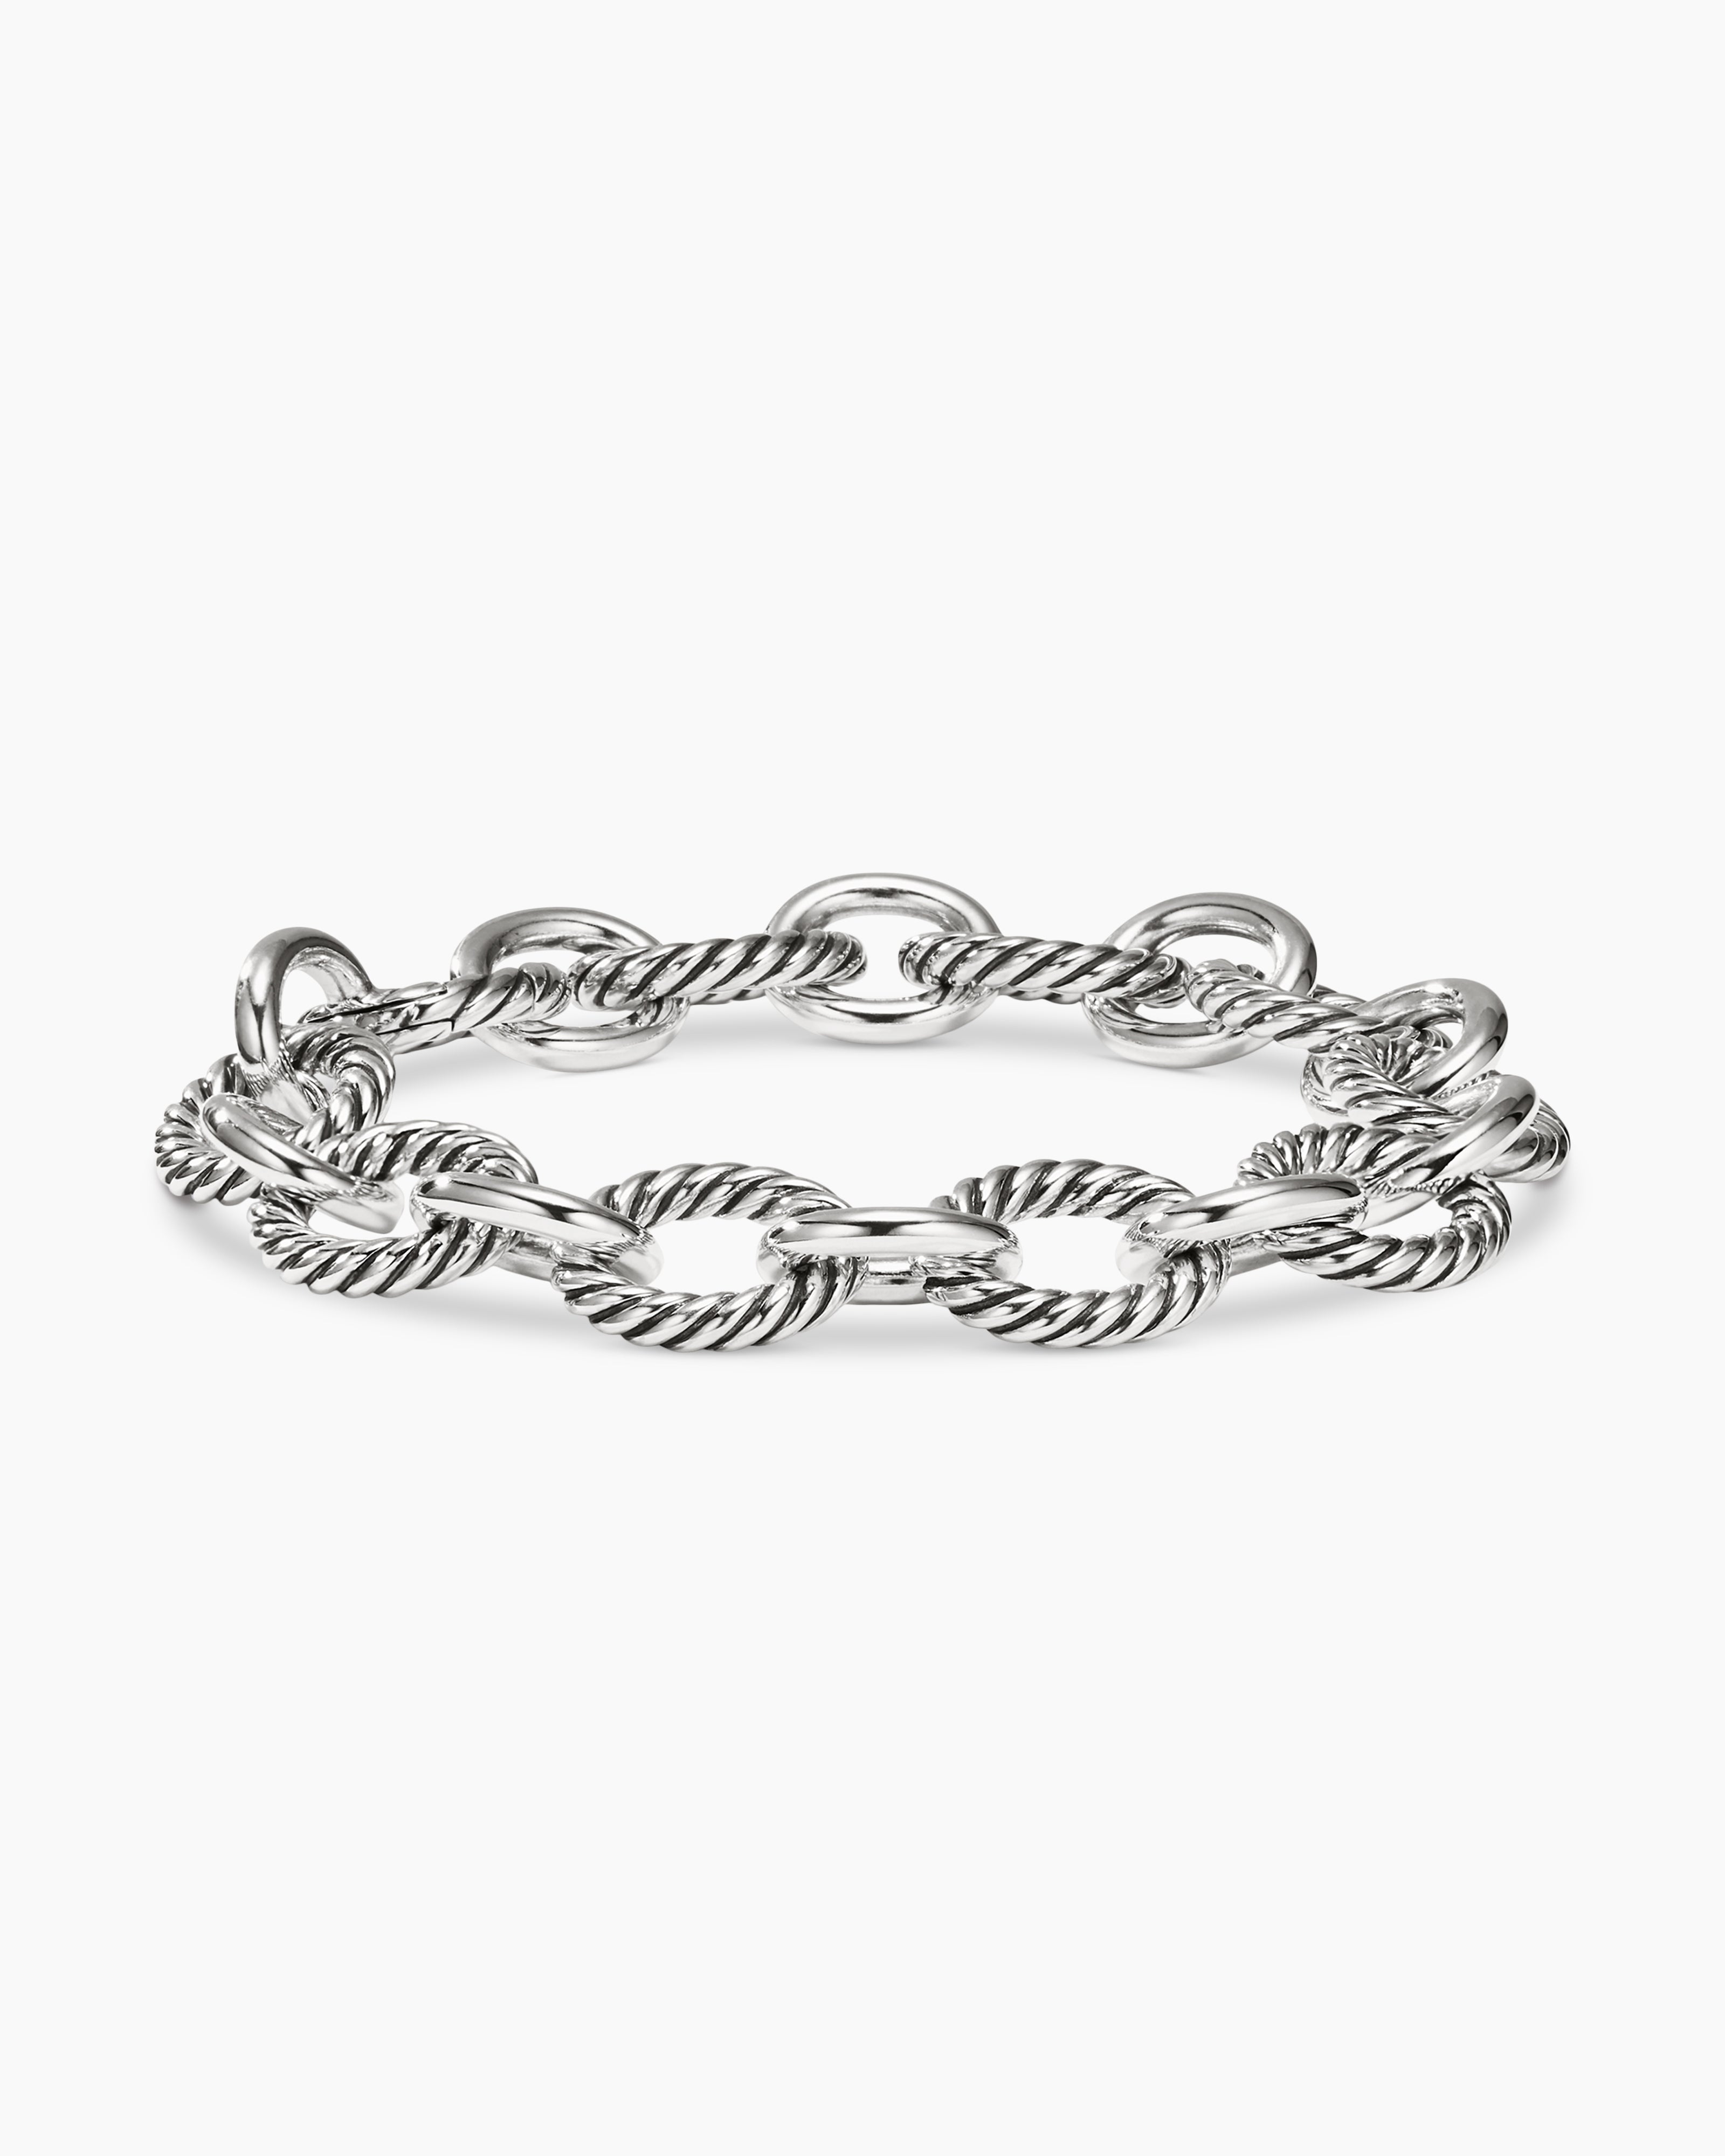 David Yurman Oval Link Chain Bracelet in Sterling Silver and 18k Yellow  Gold, size large | Lee Michaels Fine Jewelry stores